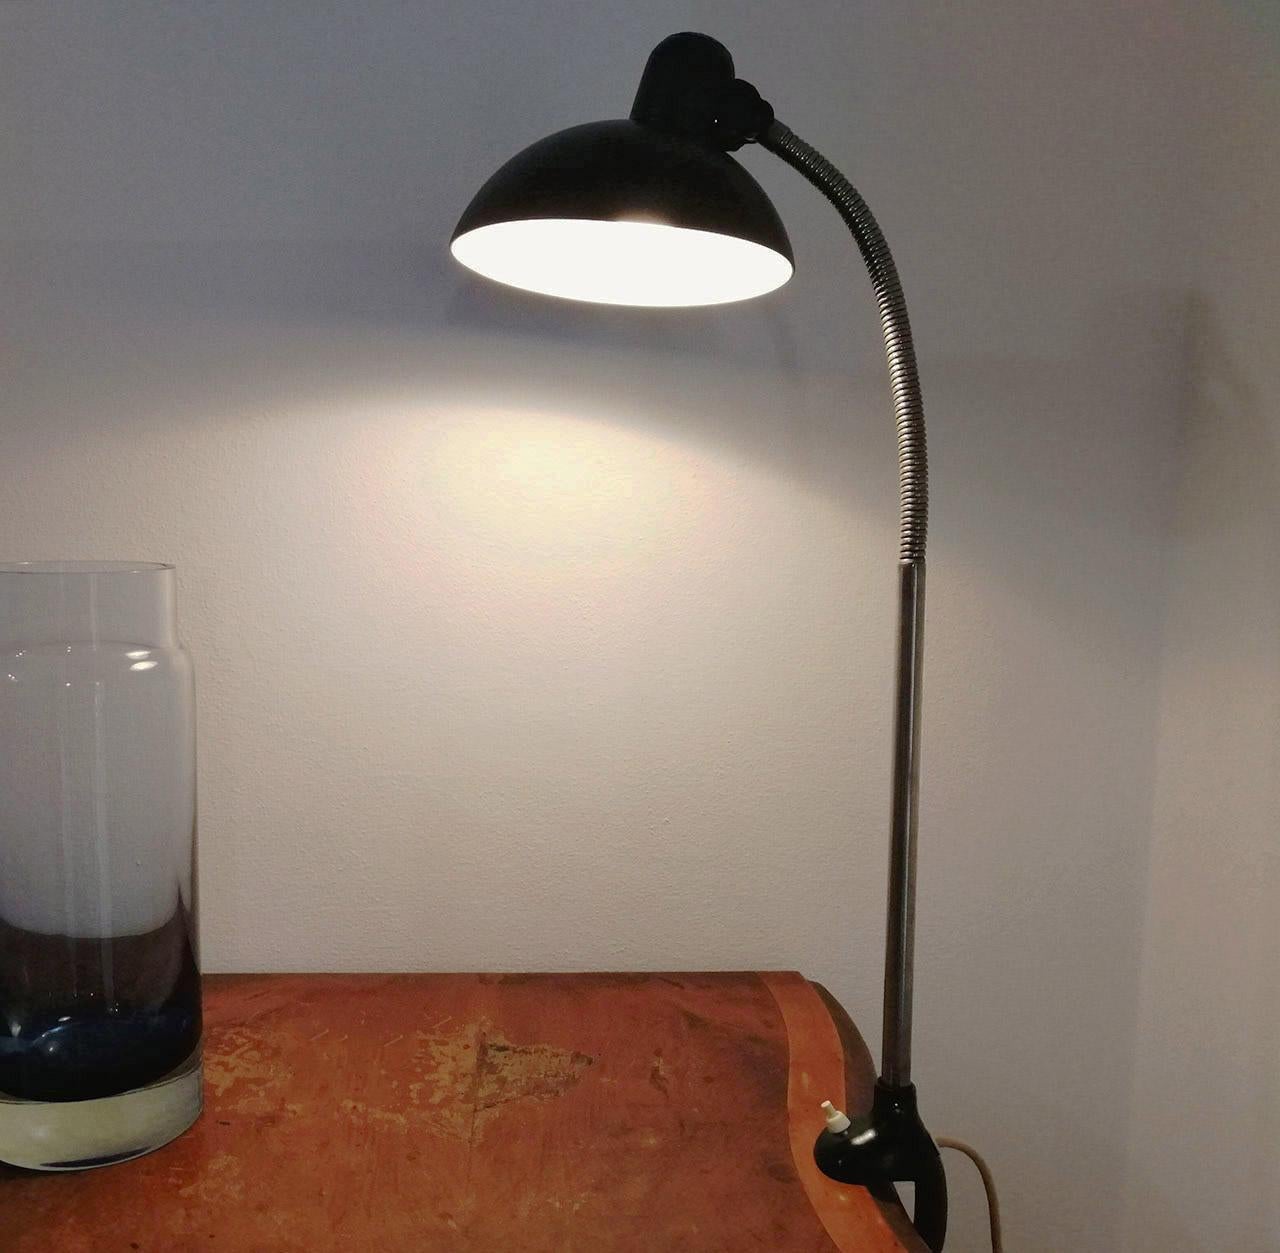 German Kaiser Idell 6740 Adjustable Table Lamp by Christian Dell 1930s For Sale